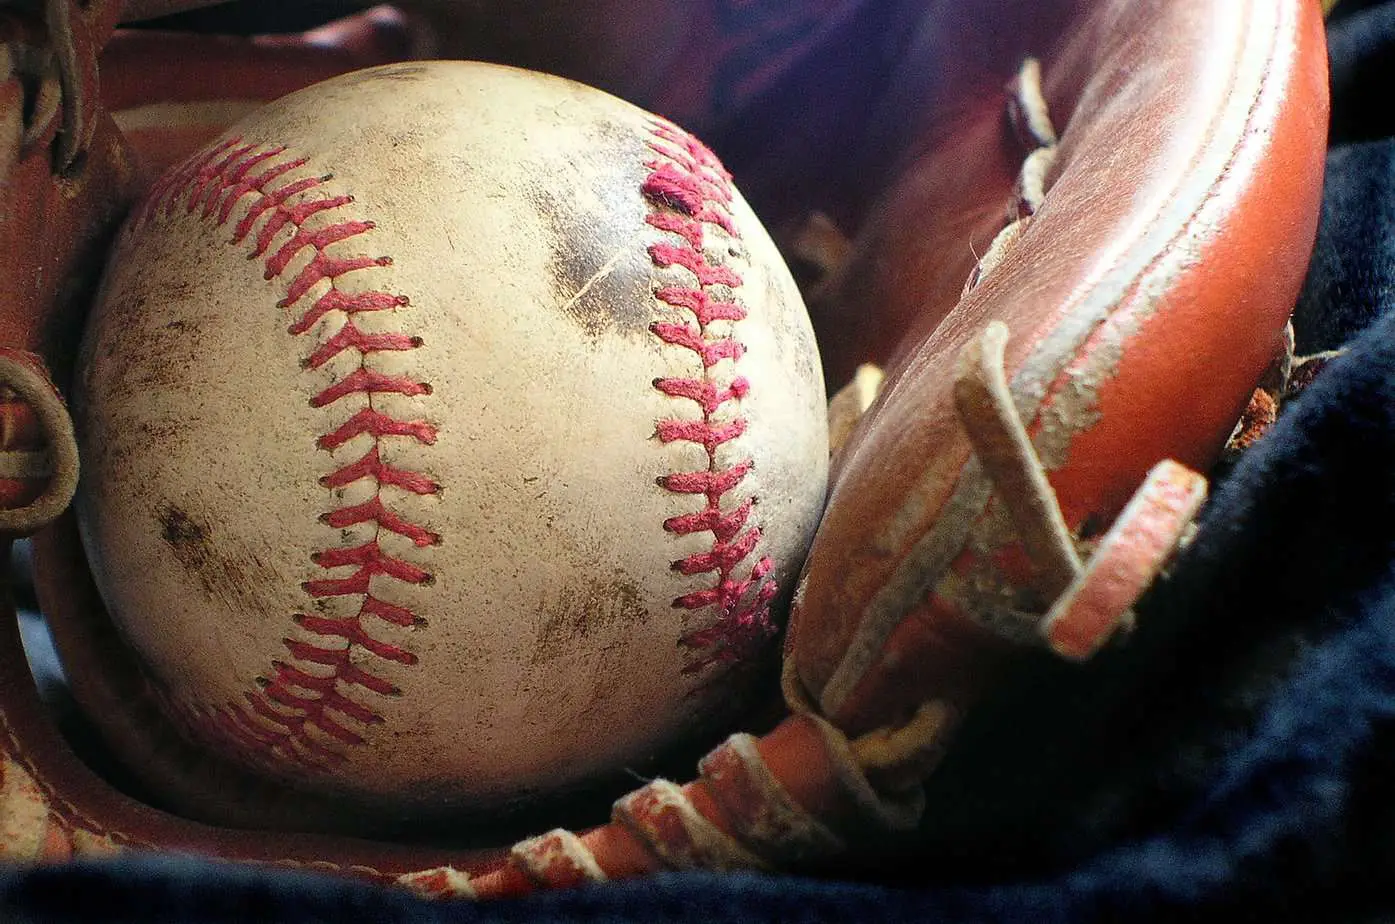 How Many Baseballs Are Rubbed Up For A Game?